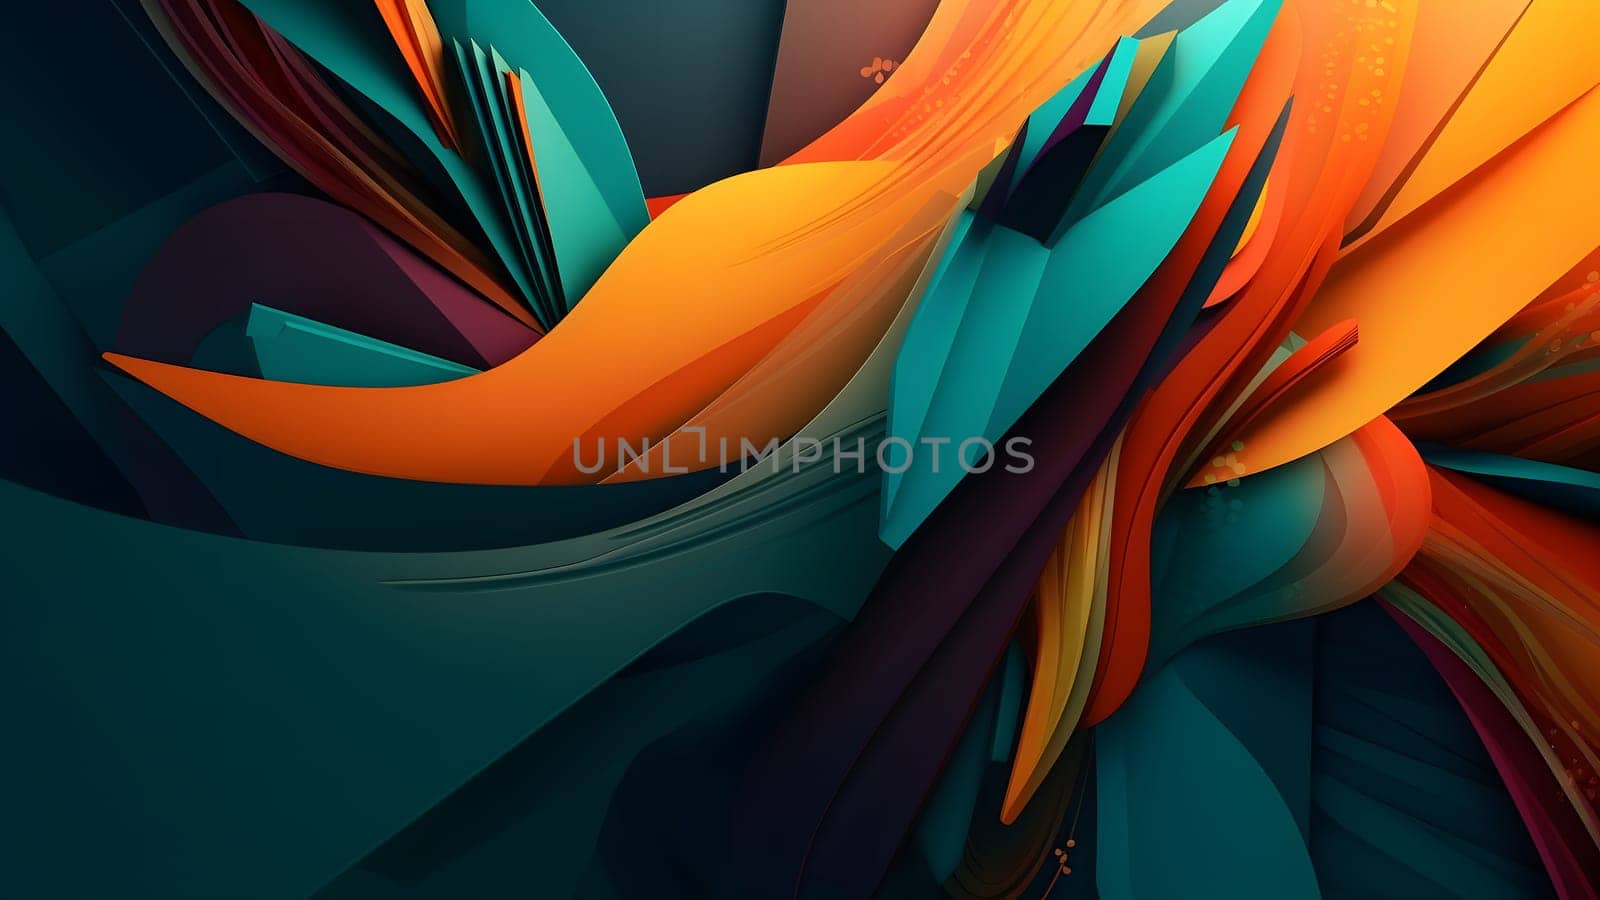 abstract teal-orange background and wallpaper. Not based on any actual person, scene or pattern.